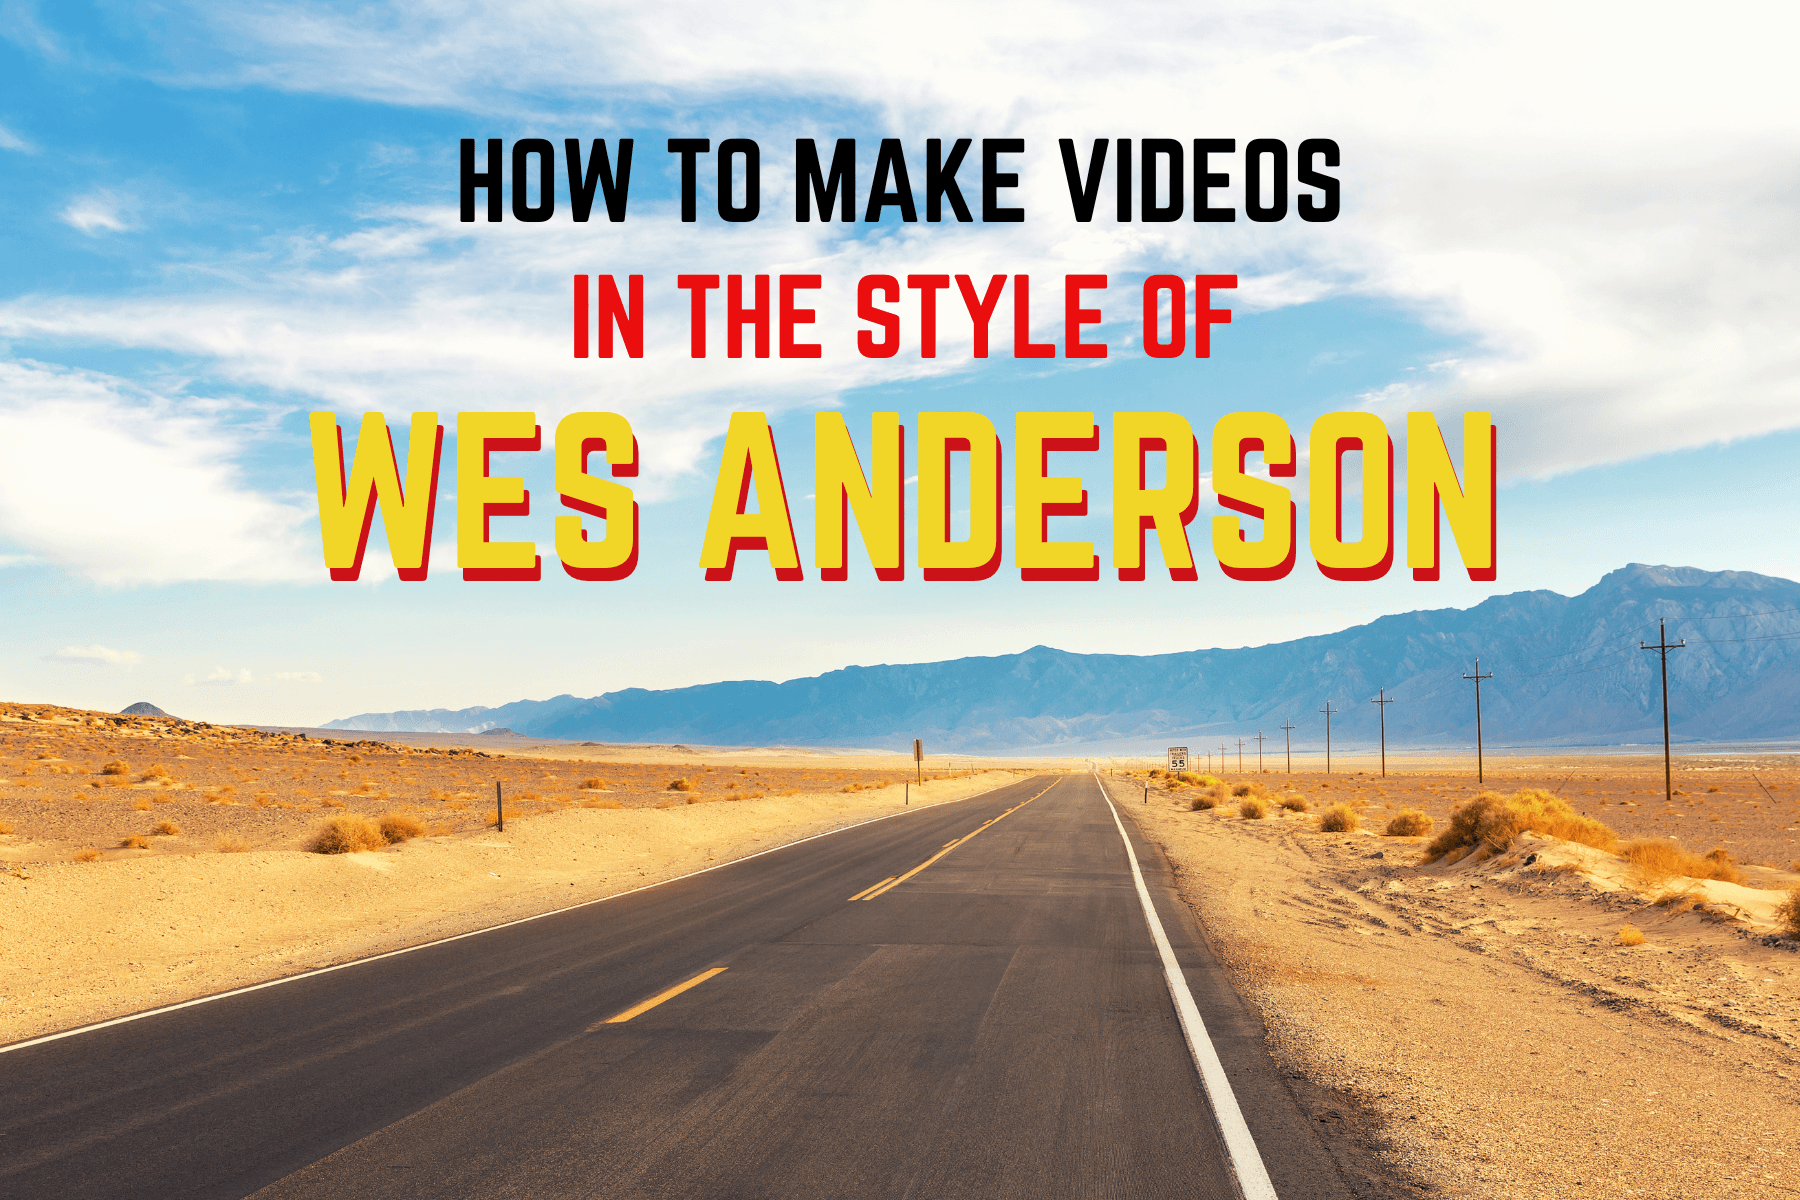 How to achieve the Wes Anderson look in photographs